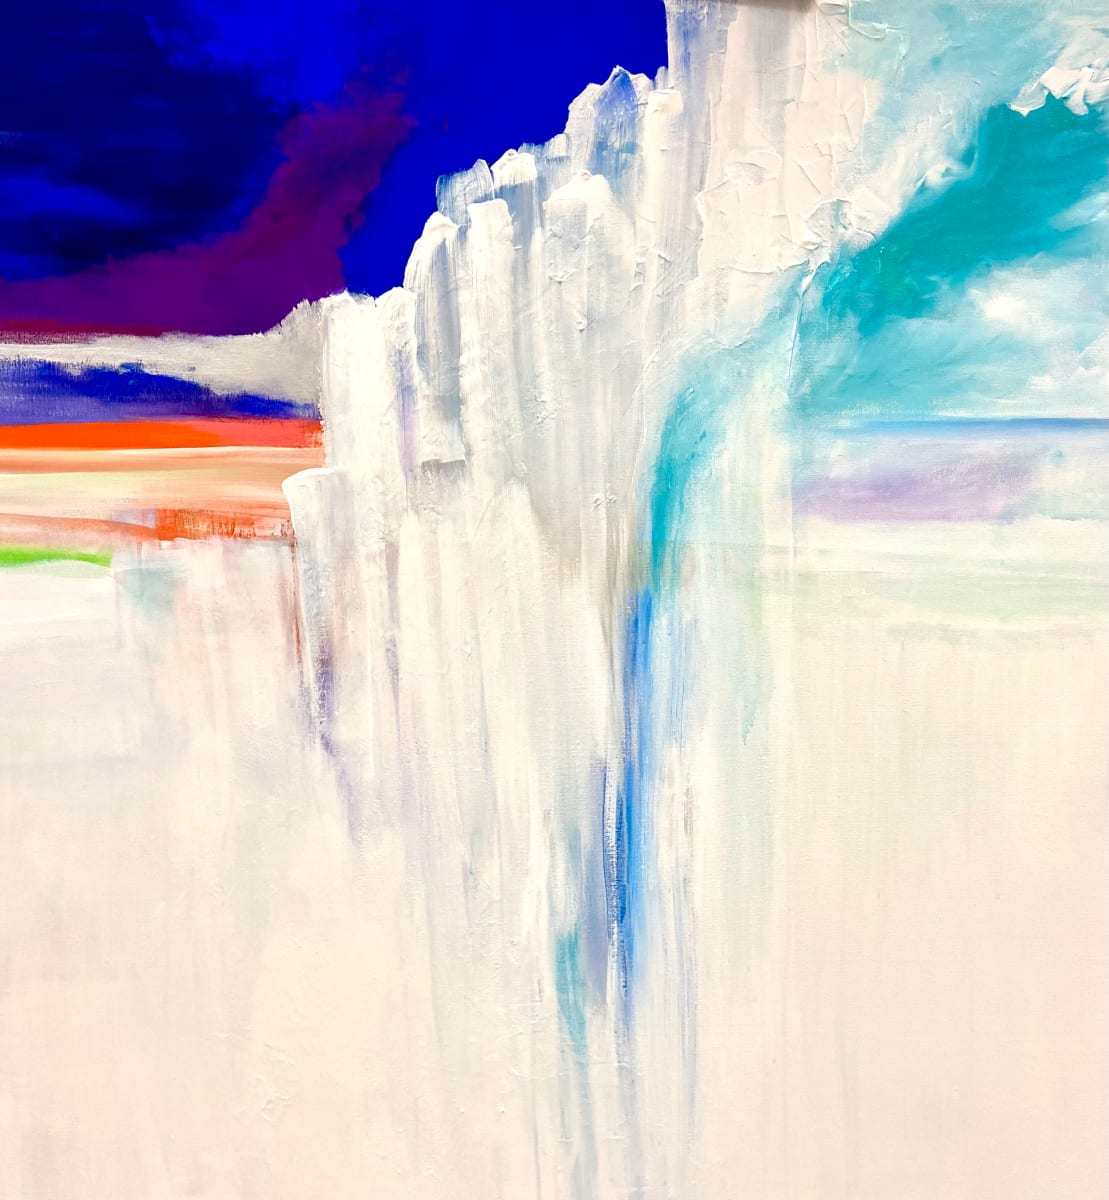 Finding Joy by Julia Ross  Image: This playful piece features dark gouche purples and blues with vibrant orange accents supporting an interplay of white and teal. The magical result encourages the imagination and lifts the spirit.